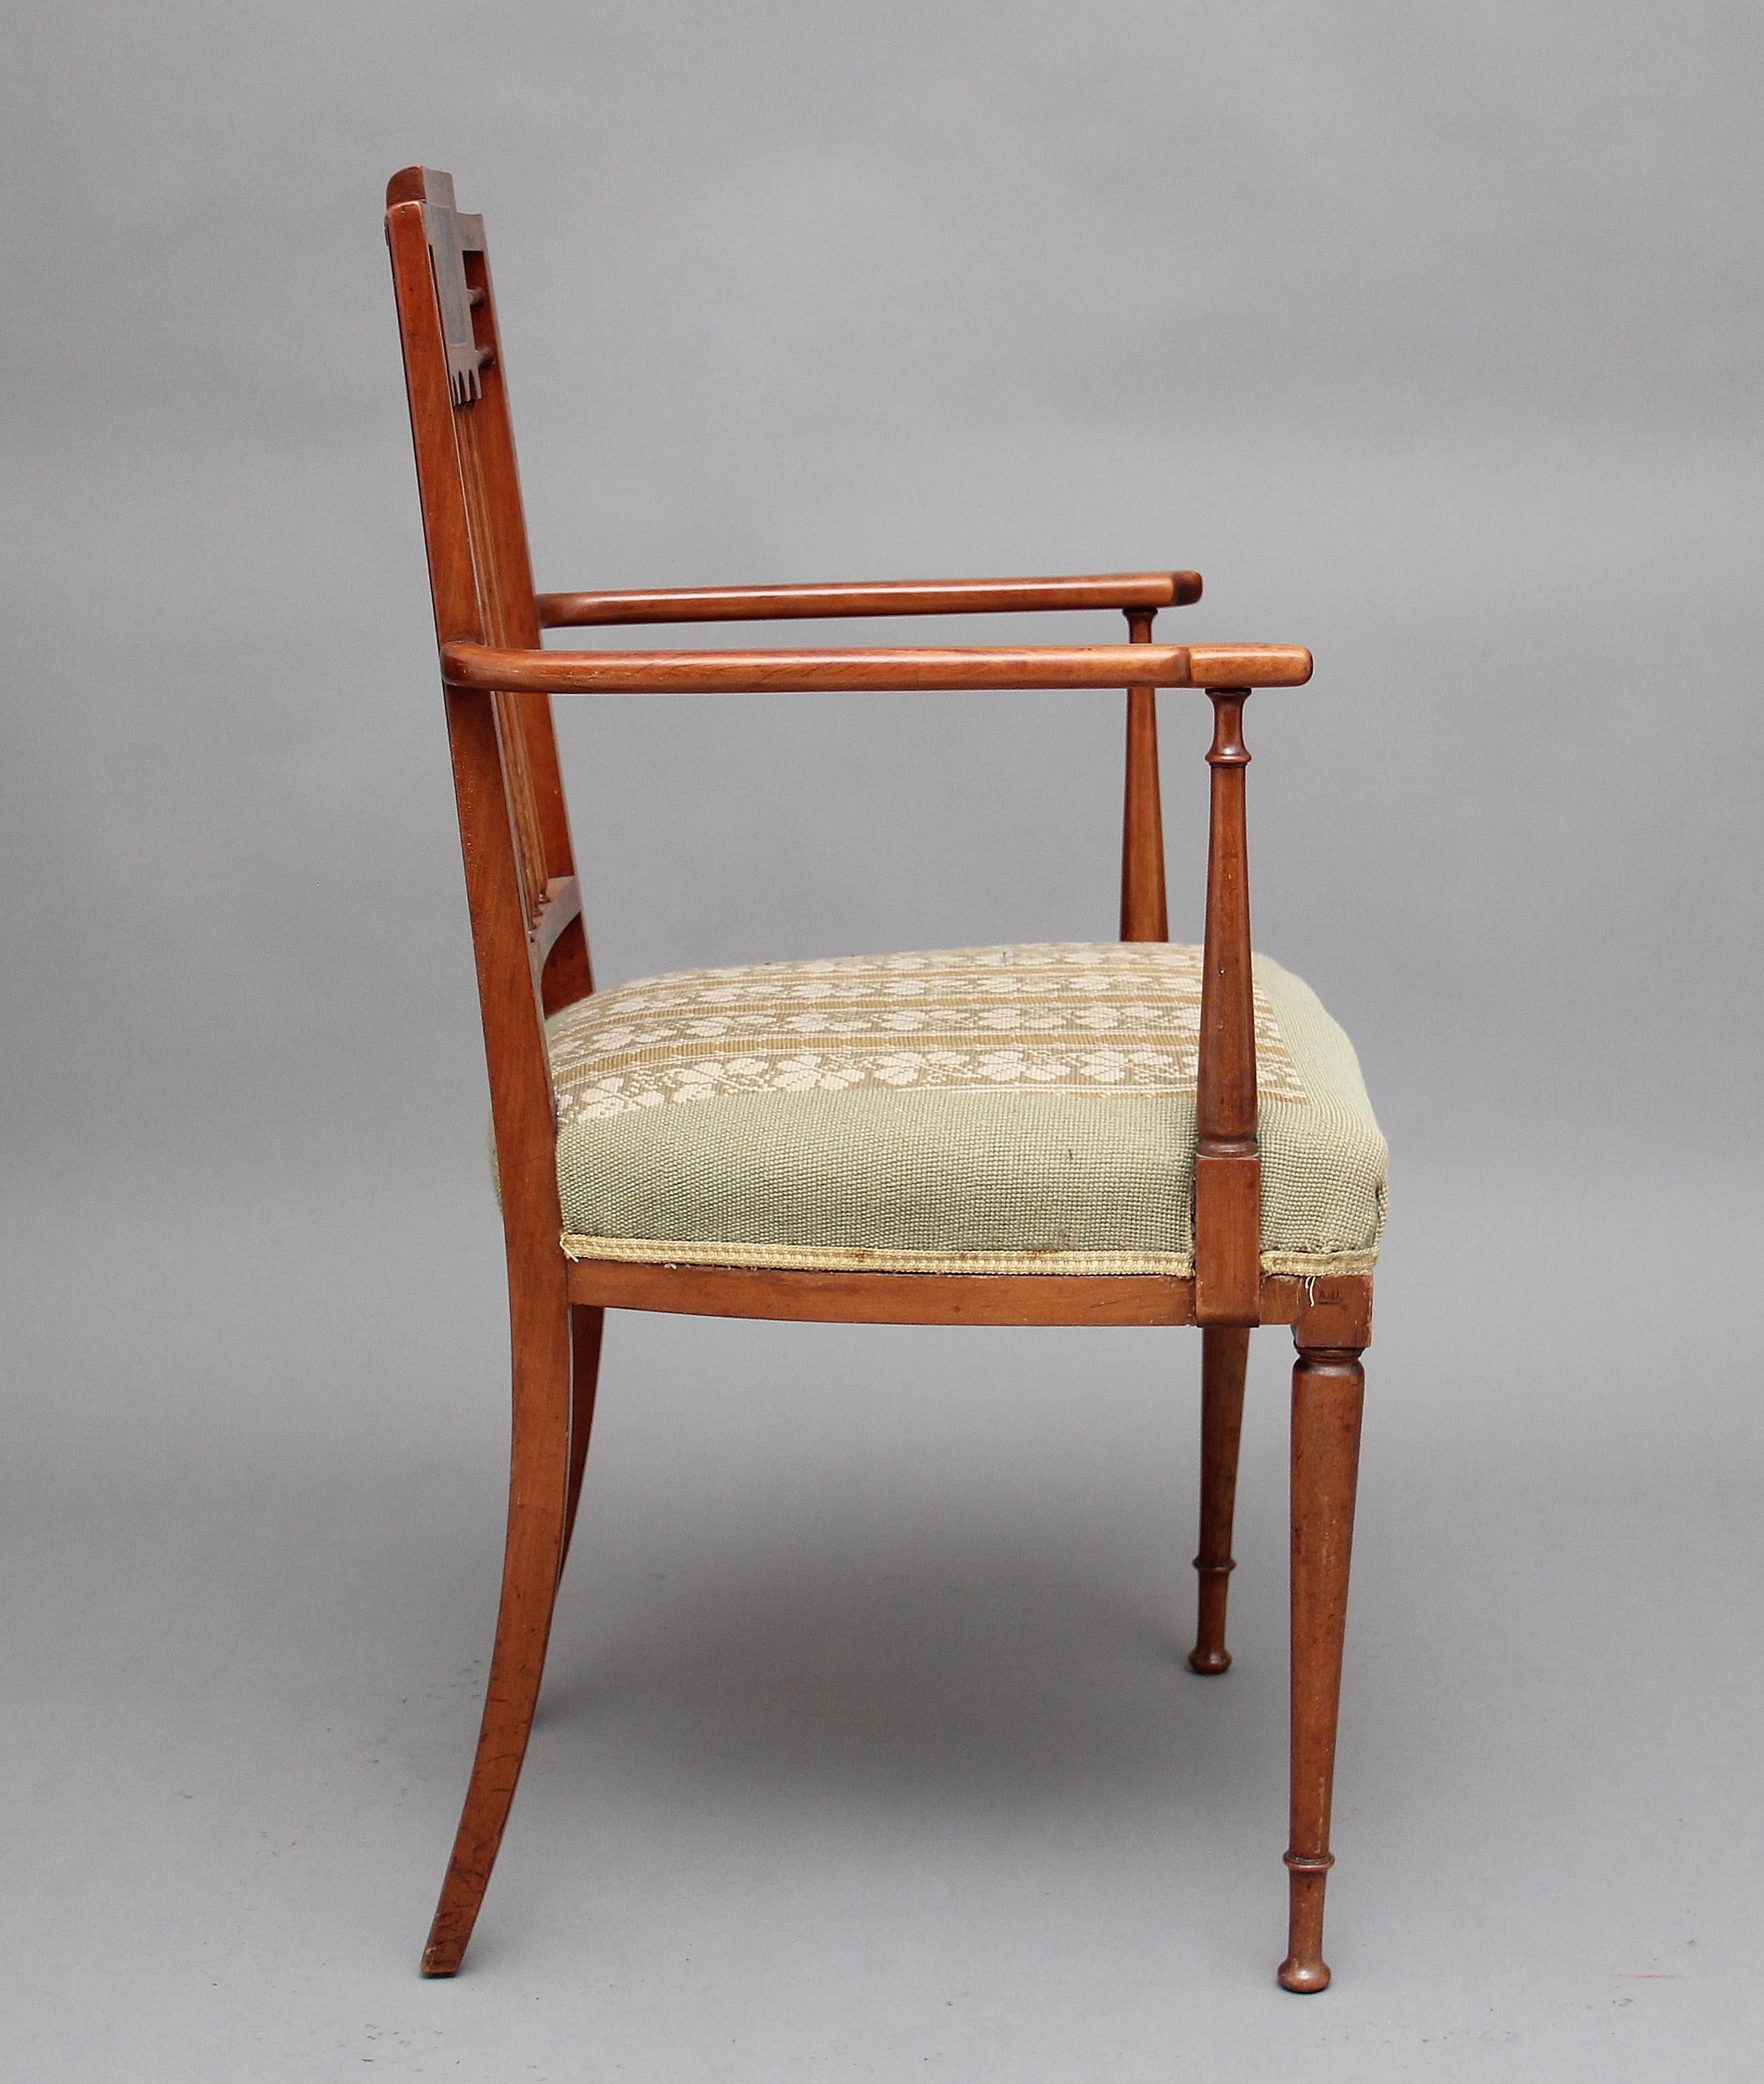 An early 20th century Sheraton revival satinwood armchair painted overall with floral decoration, the chair back consisting of finely turned spindles with a panel at the top painted with cherubs, turned uprights with shaped arm supports, embroidered